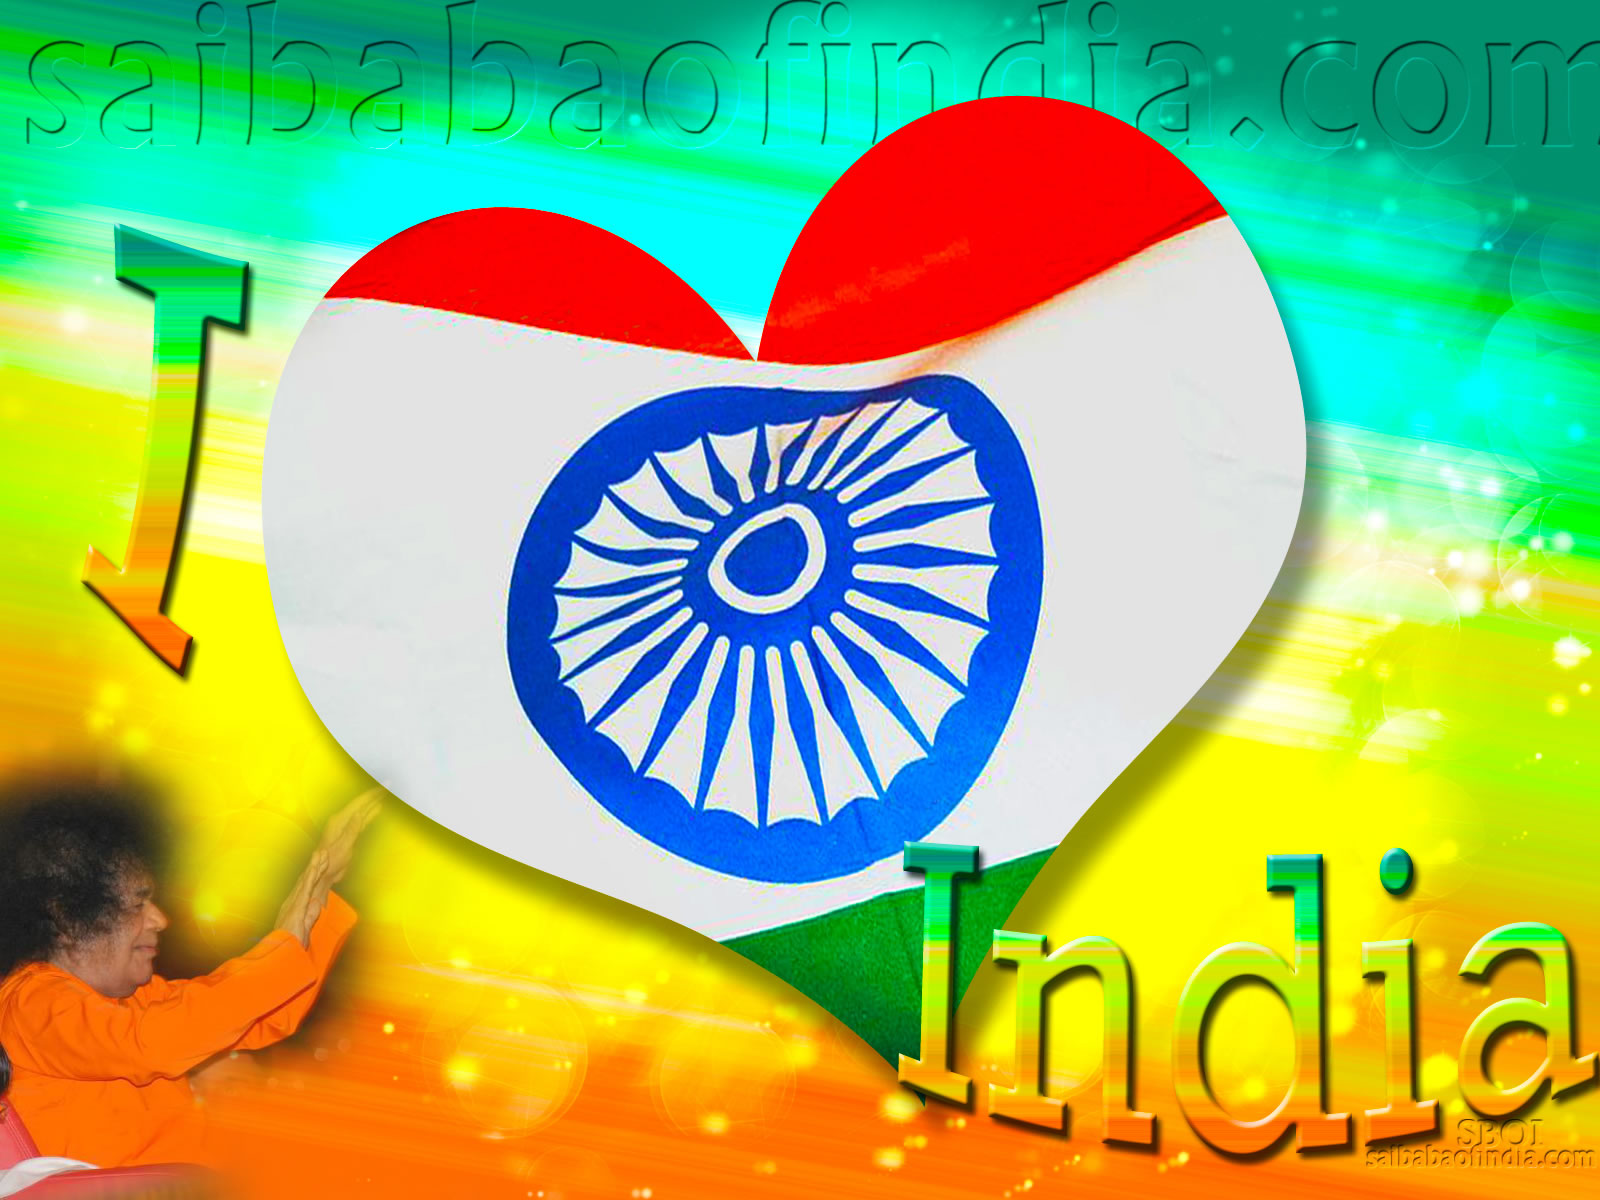 Independence day wallpapers & greeting cards 15th August- Sai Baba Of India  - 15th August Wallpapers -